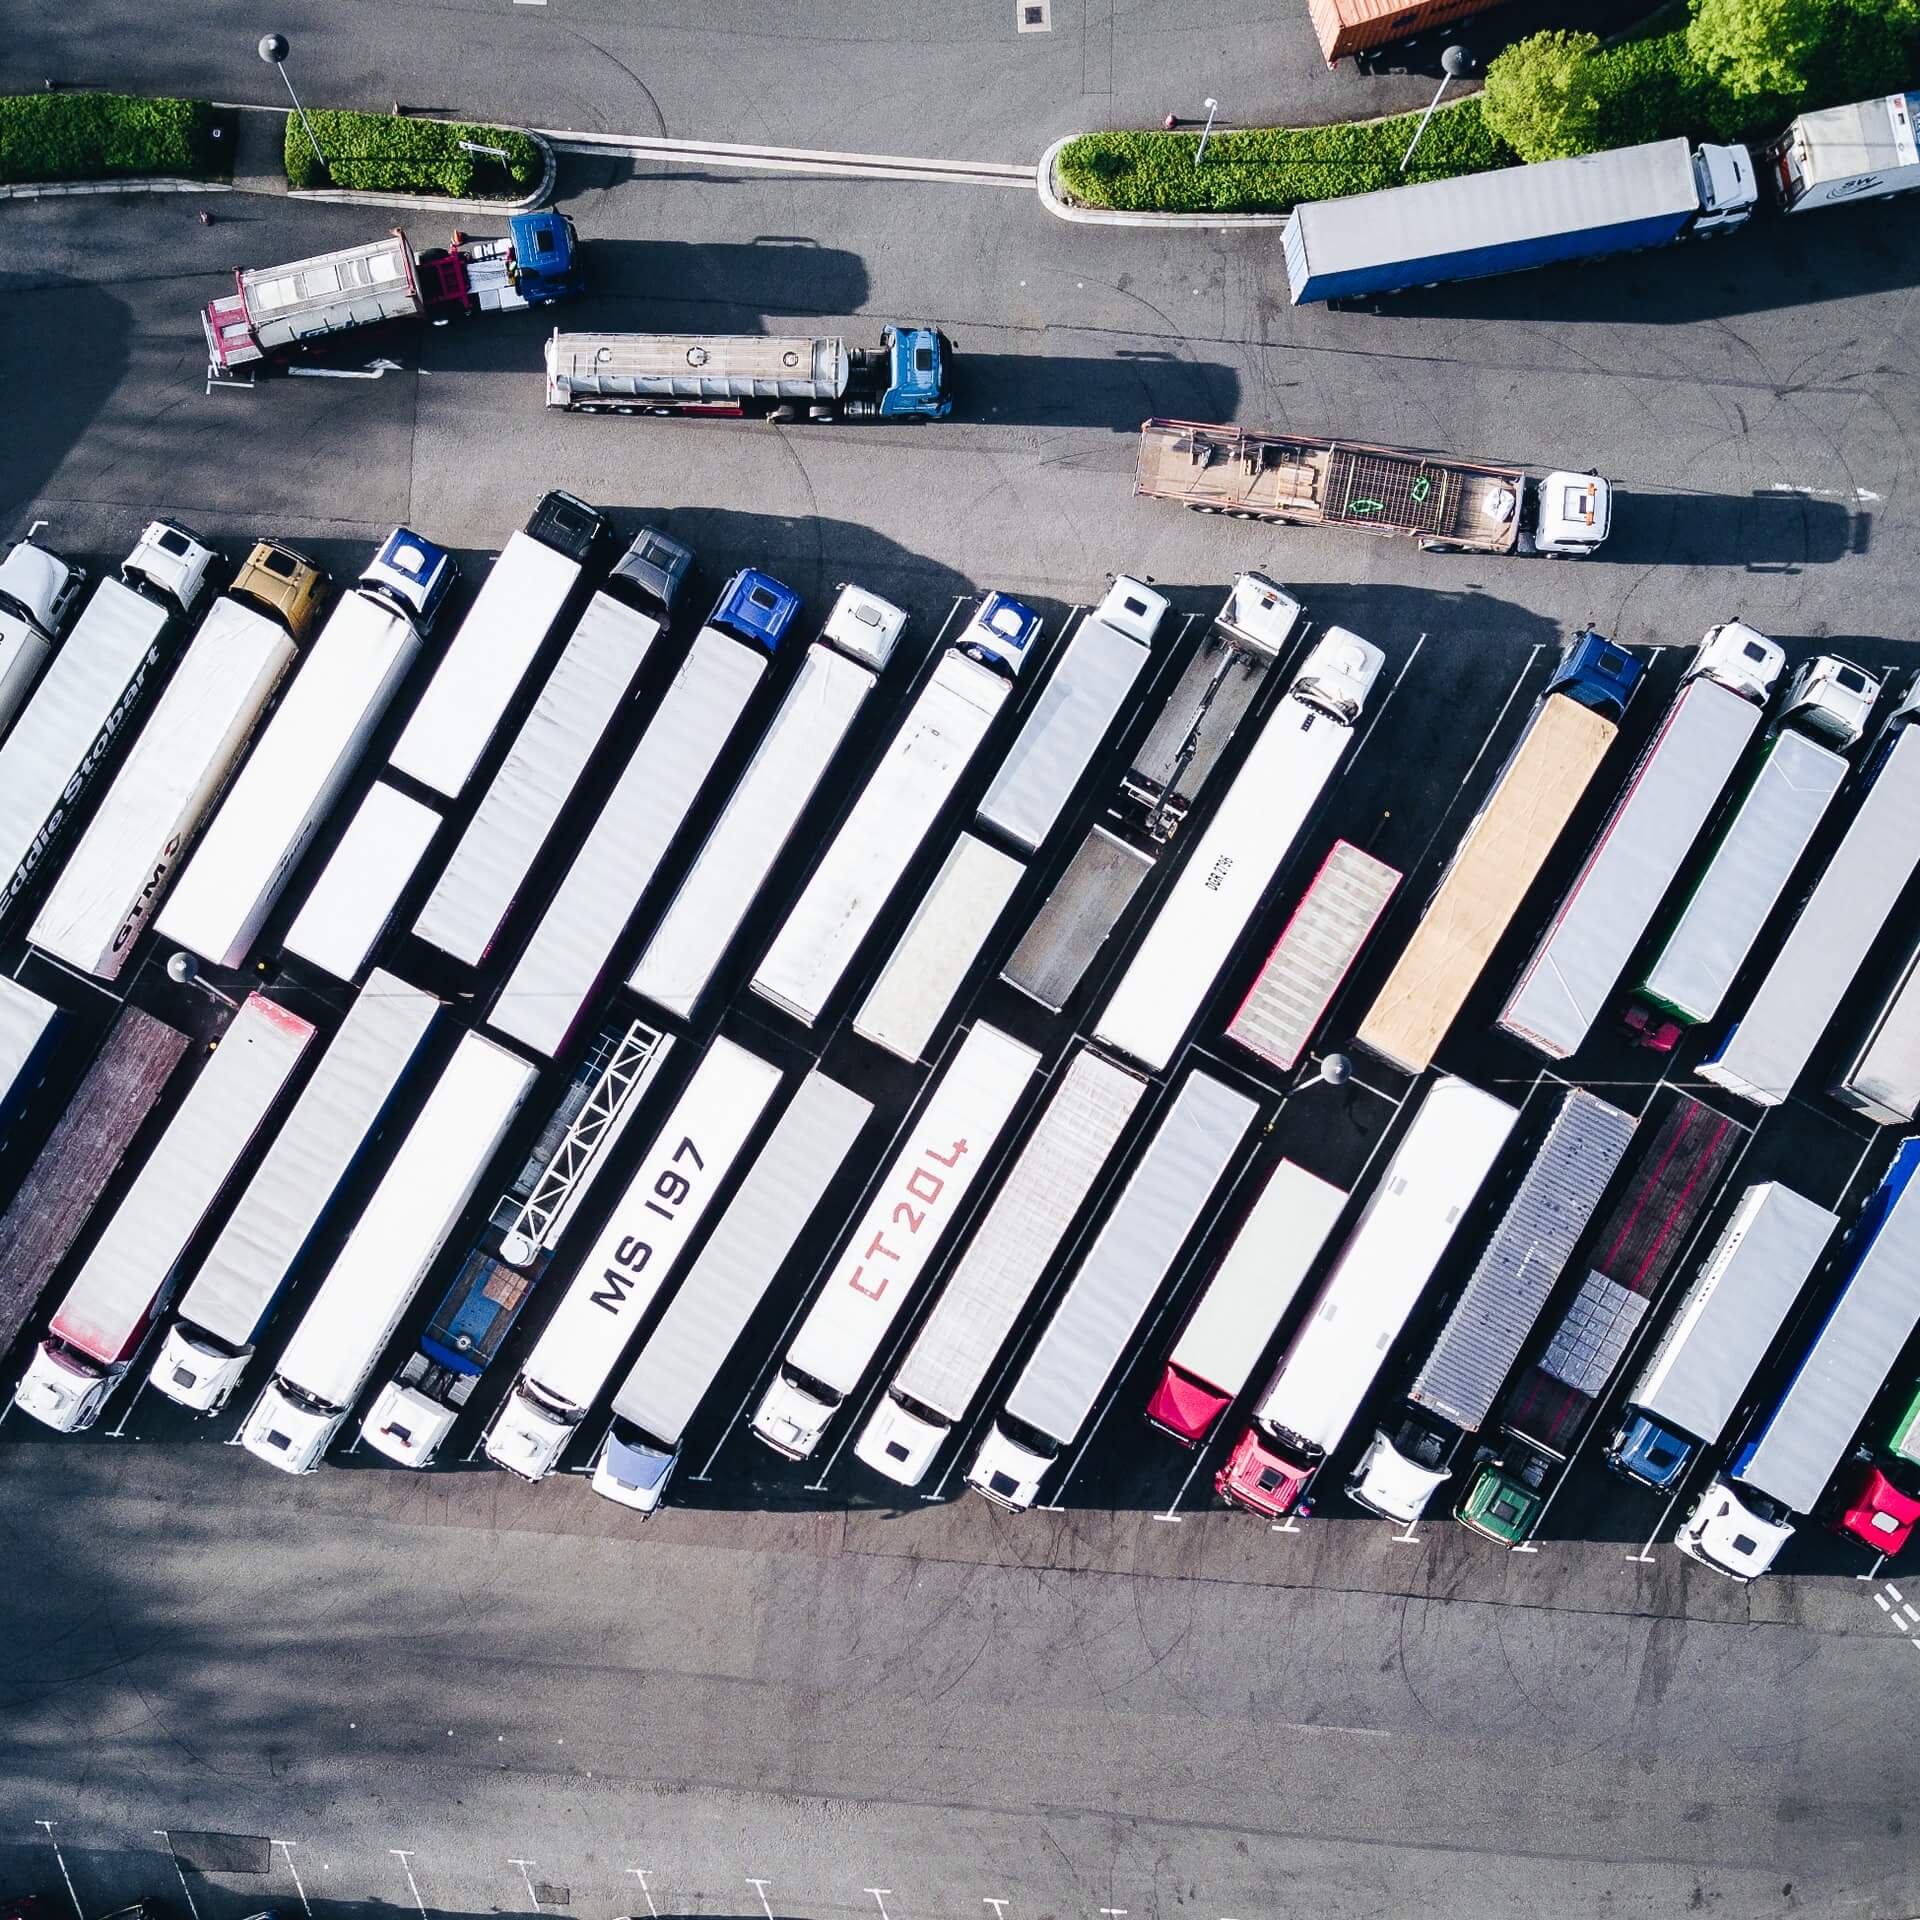 Top freight transportation issues and how to avoid them